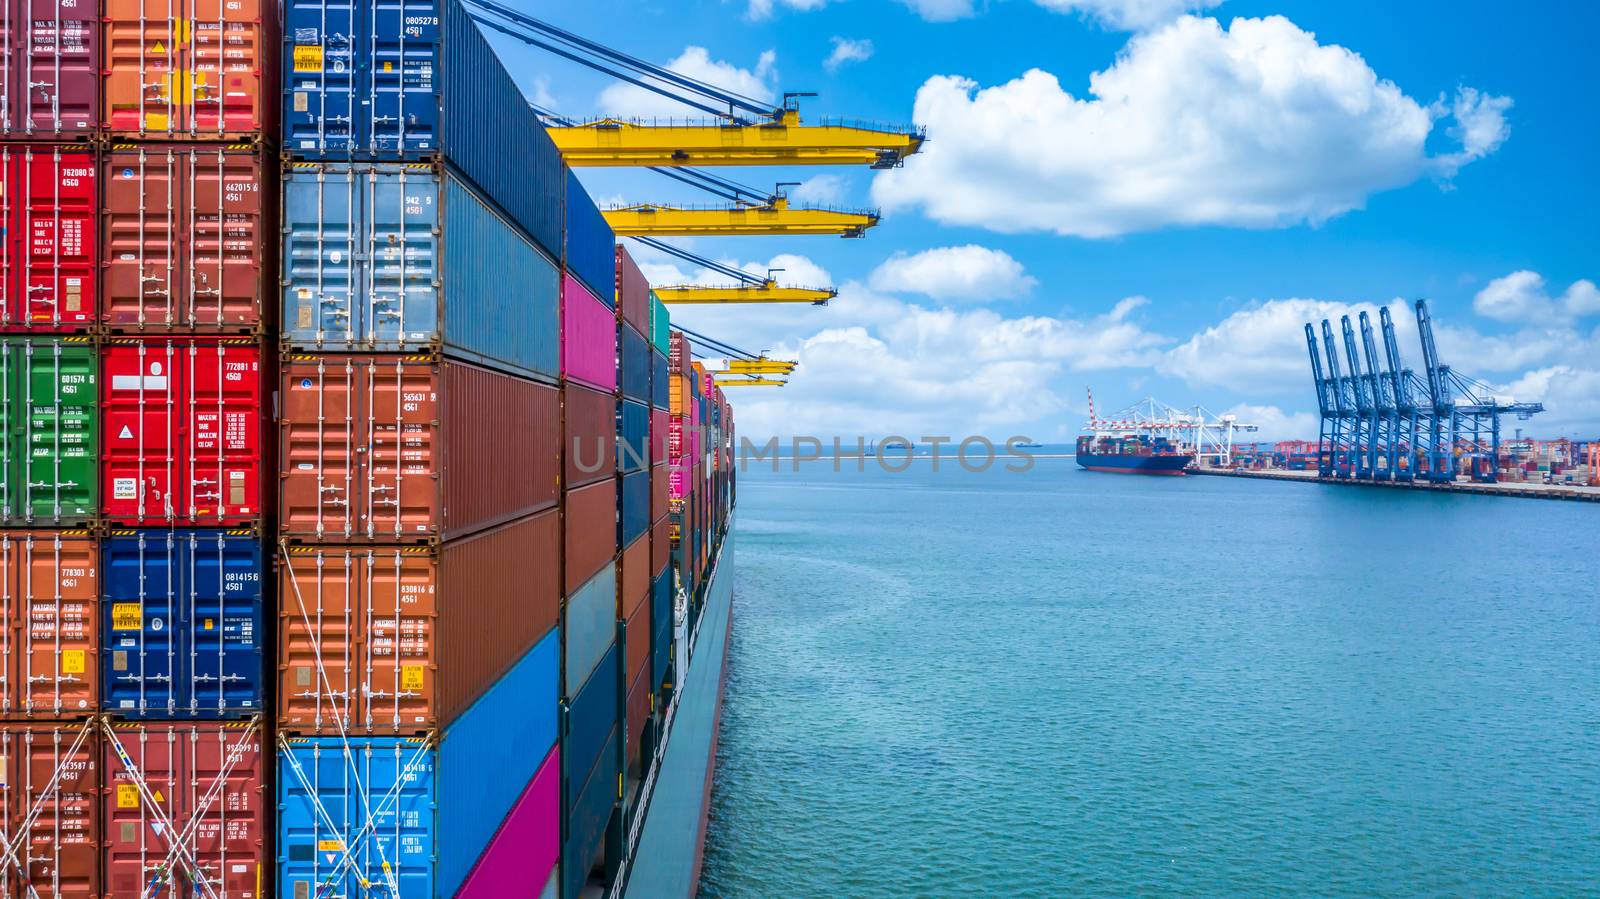 Container ship unloading in deep sea port, Global business logistic import export freight shipping transportation oversea worldwide container ship, Container vessel loading cargo cargo freight ship.